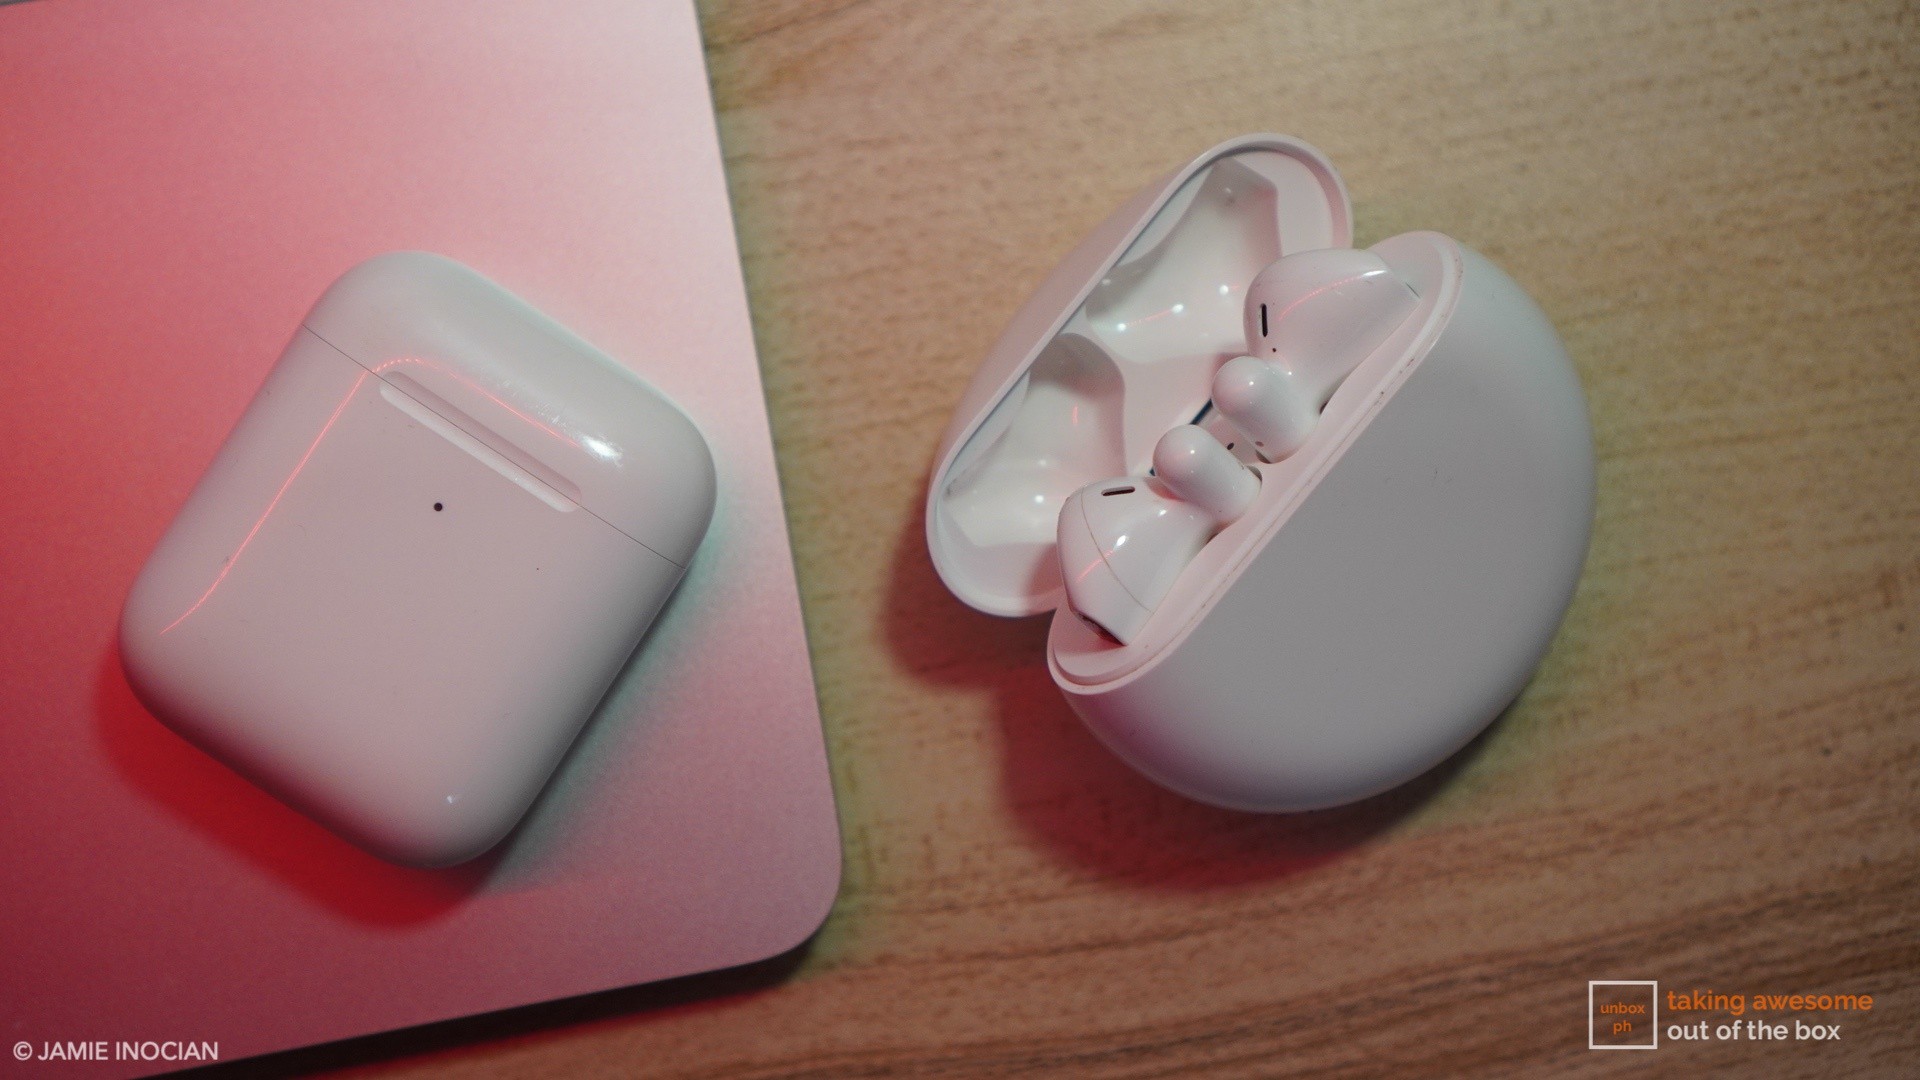 Battery of the Apple Airpods 2 vs. Huawei FreeBuds 3